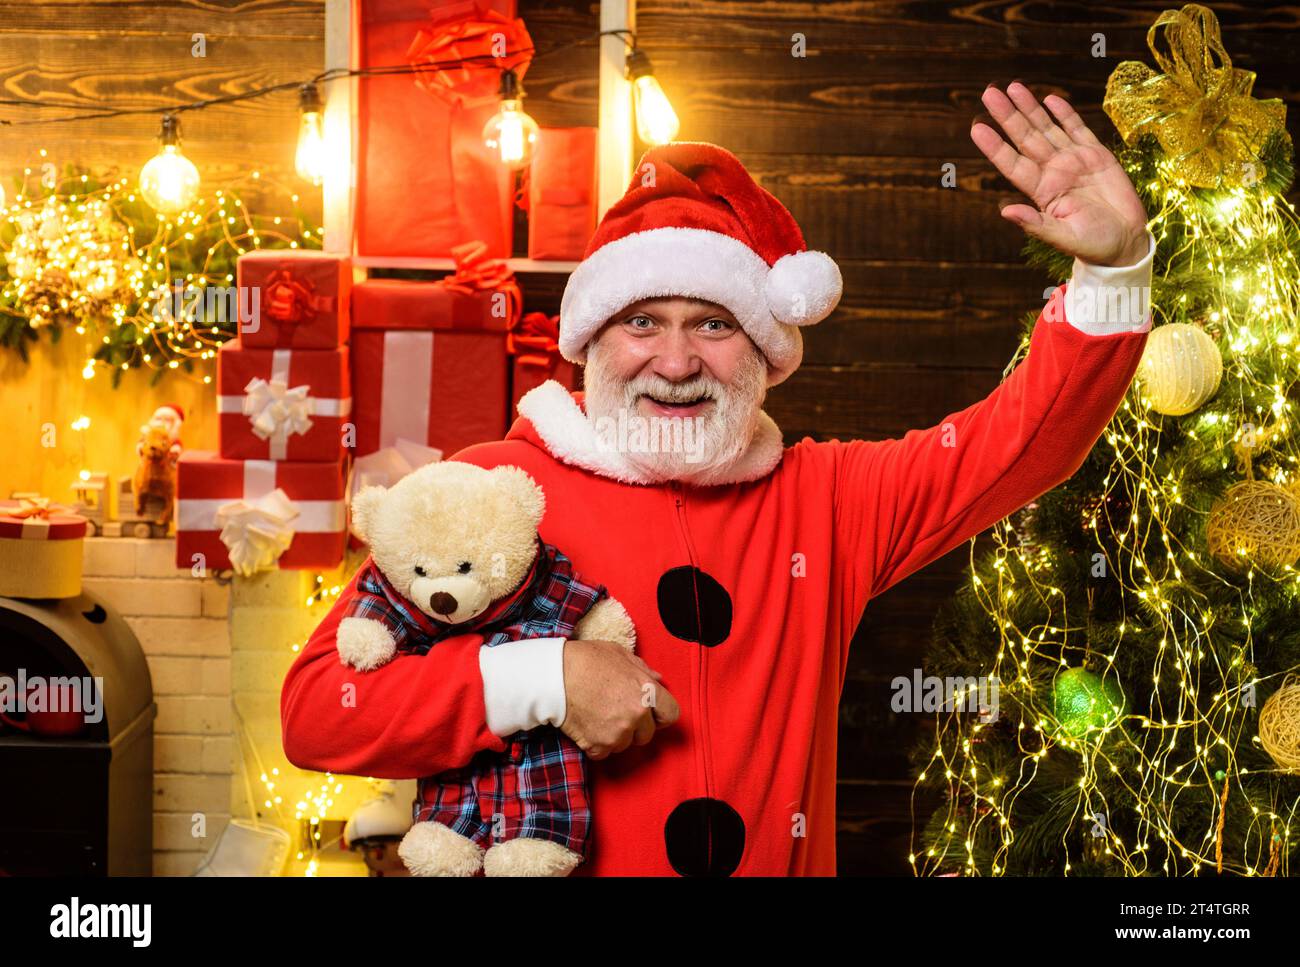 Christmas or New Year holidays. Bearded man in Santa Claus costume with teddy bear toy waving hand. Smiling Santa Claus with teddy bear in room Stock Photo